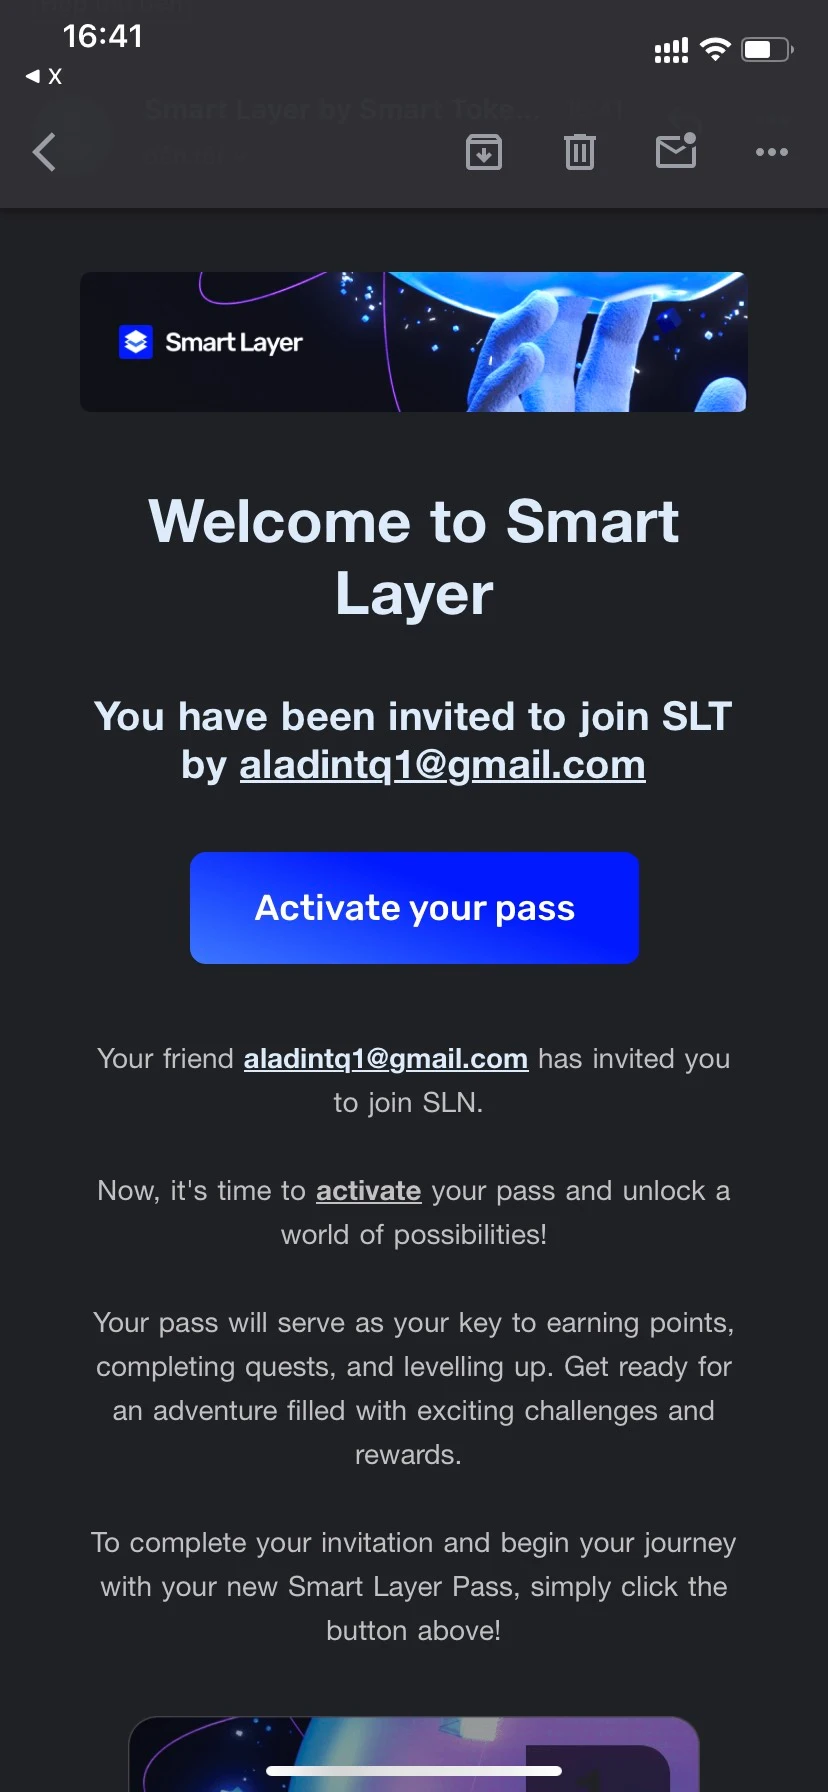 instructions for participating in airdrop smart layer 65b94fcfe815d